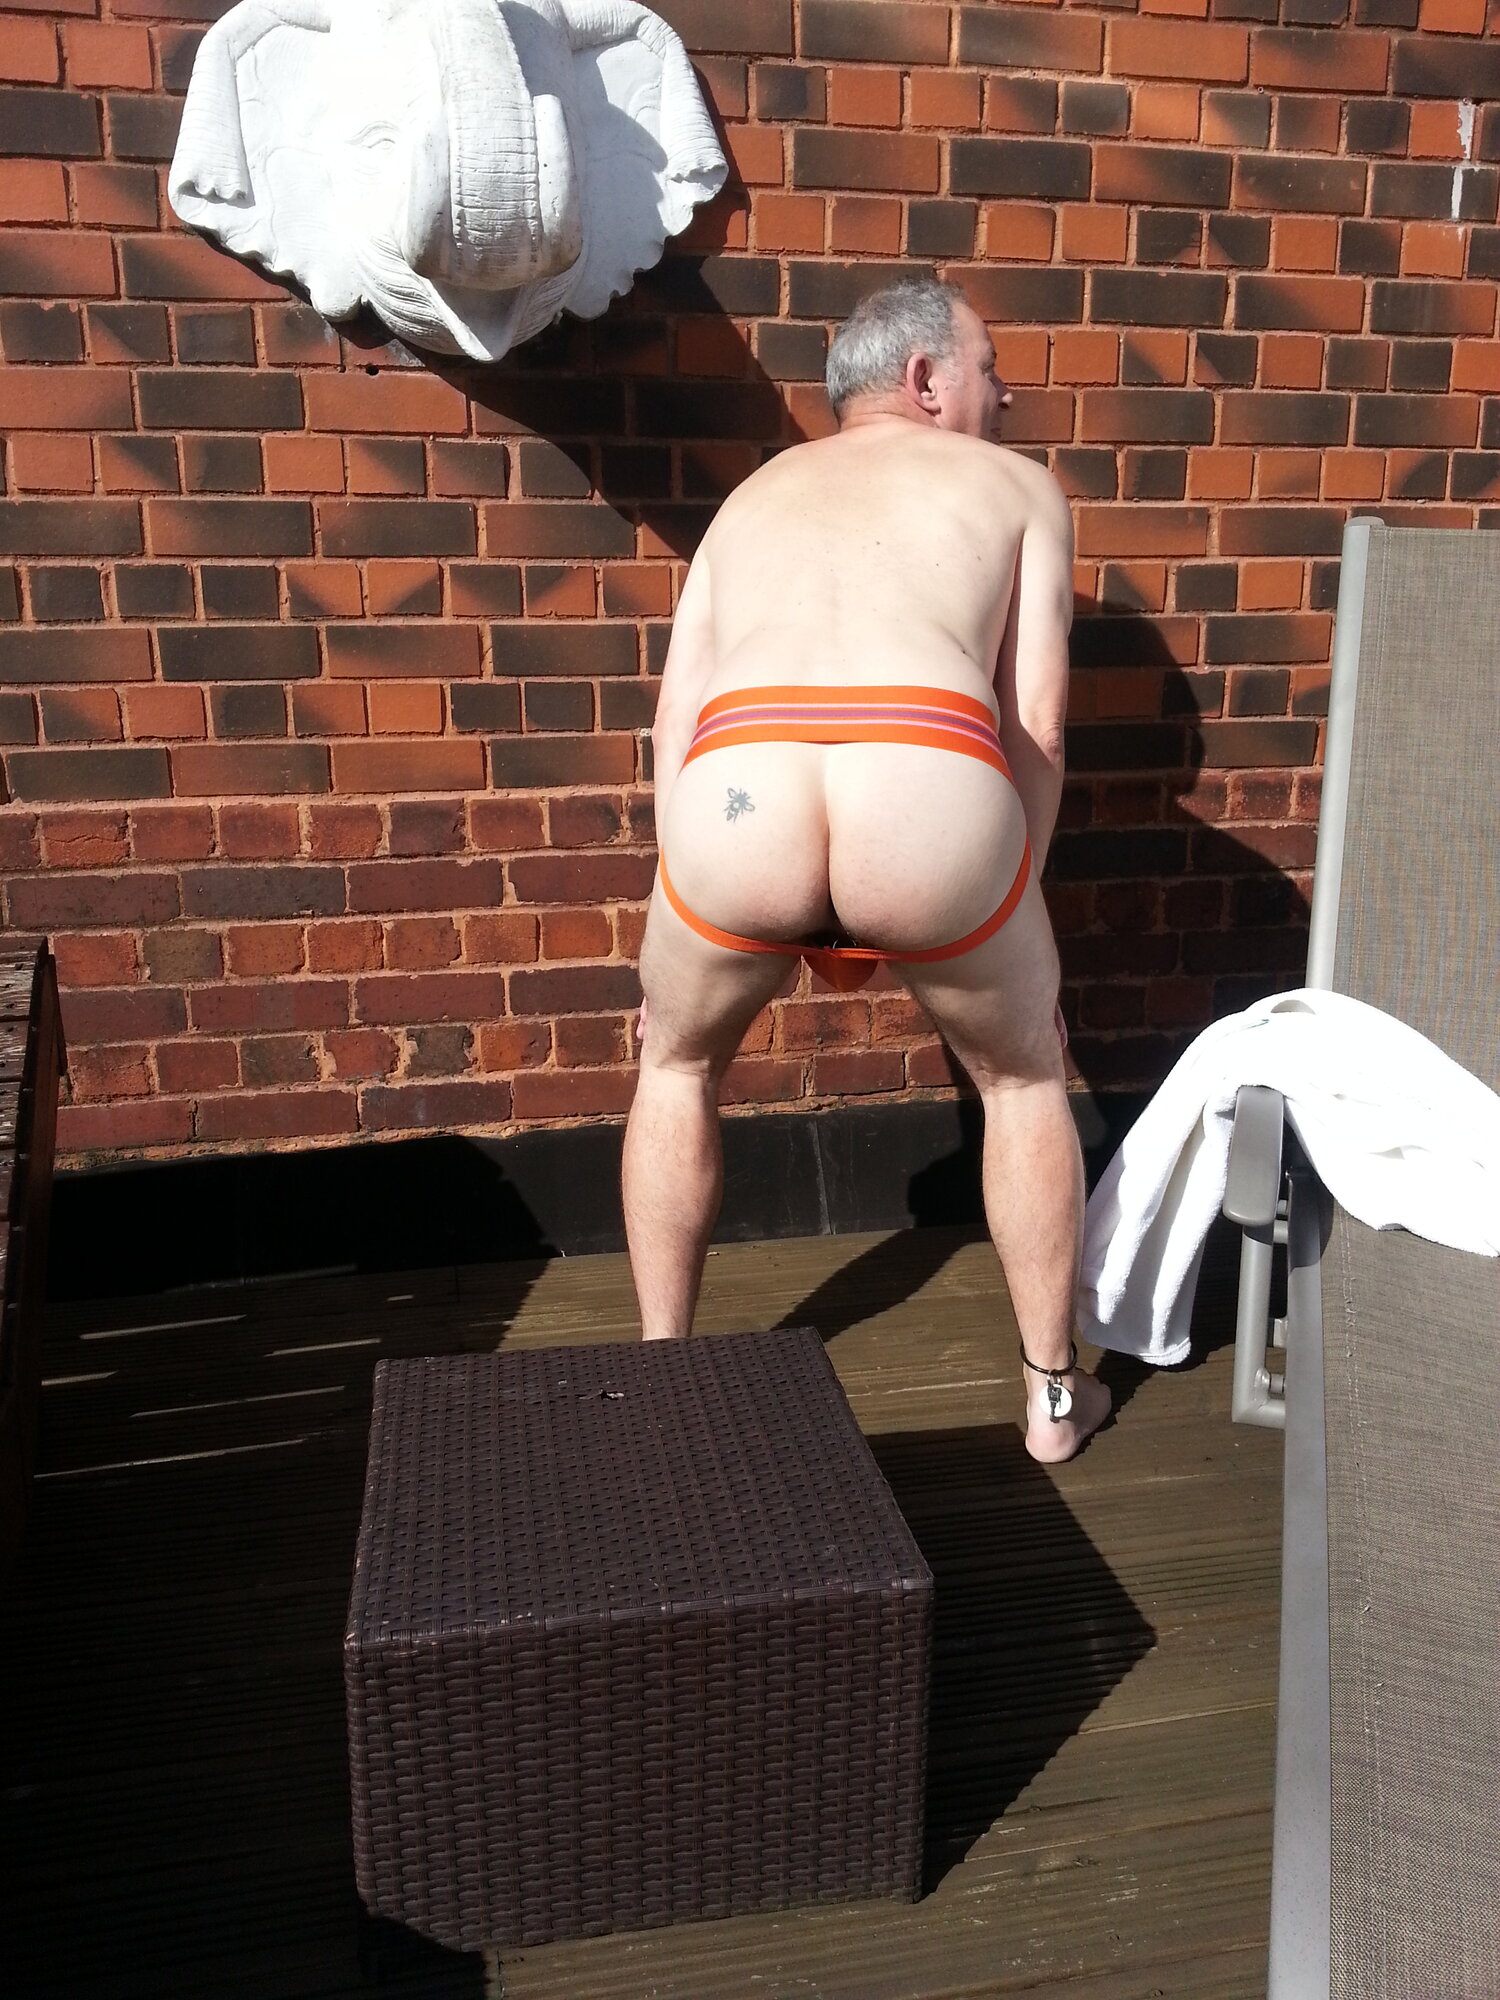 Rear view of the orange Jock Mail #2 on the roof terrace